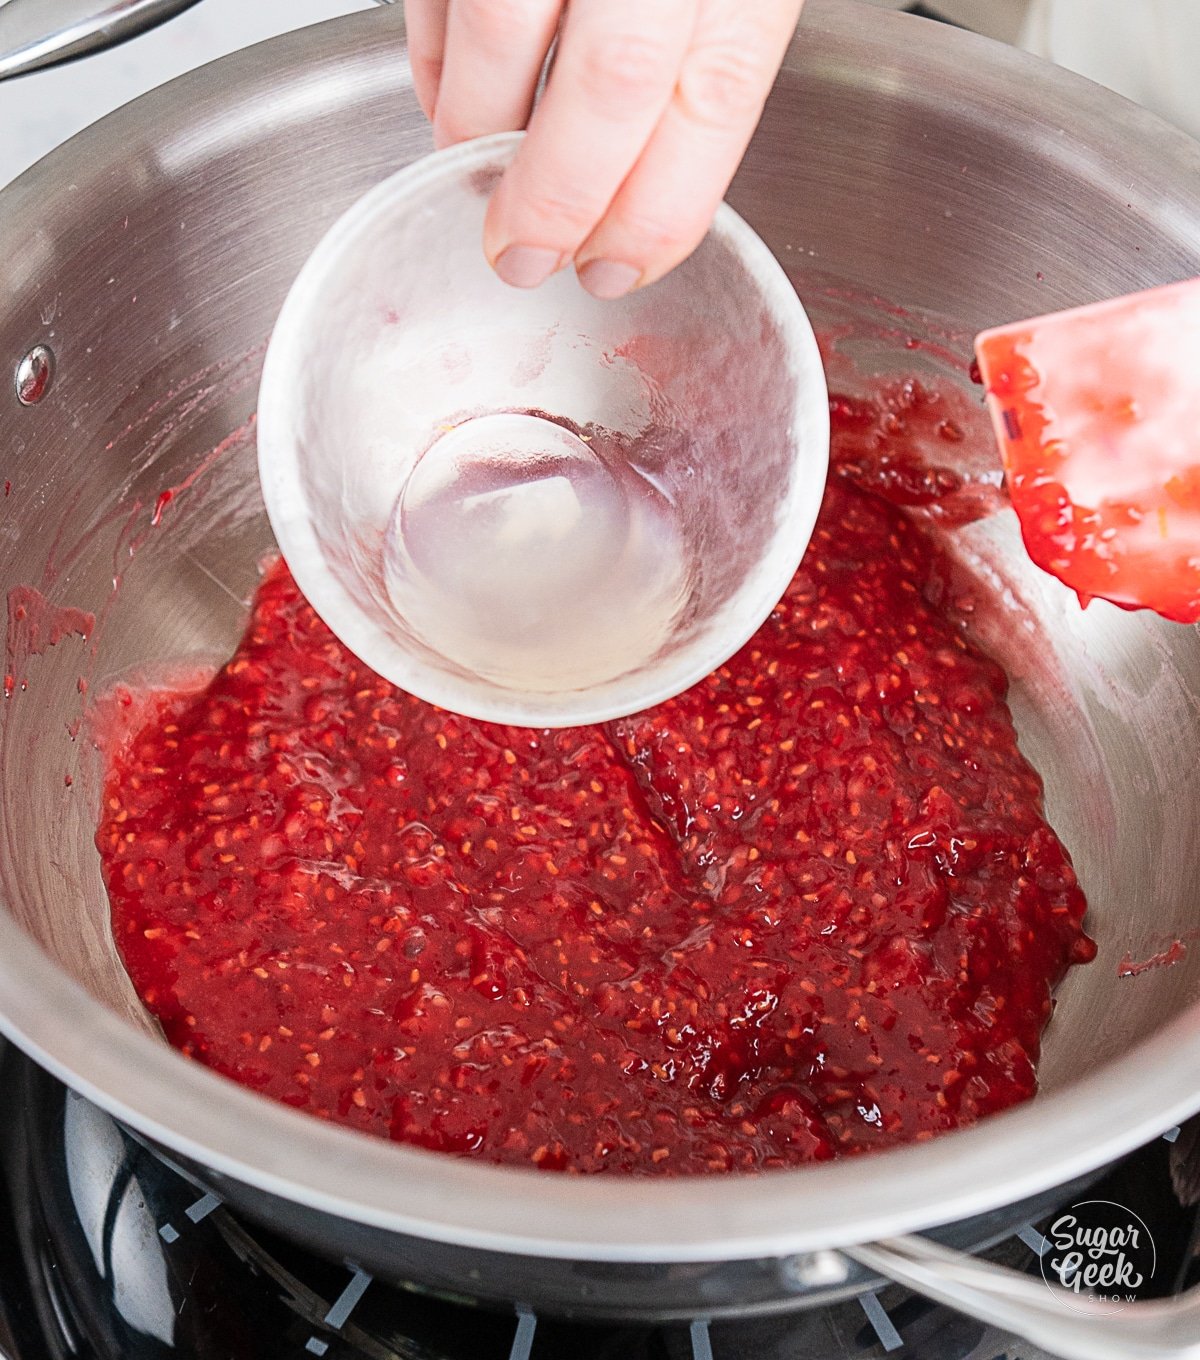 hand pouring lemon juice into raspberry mixture in a pot.